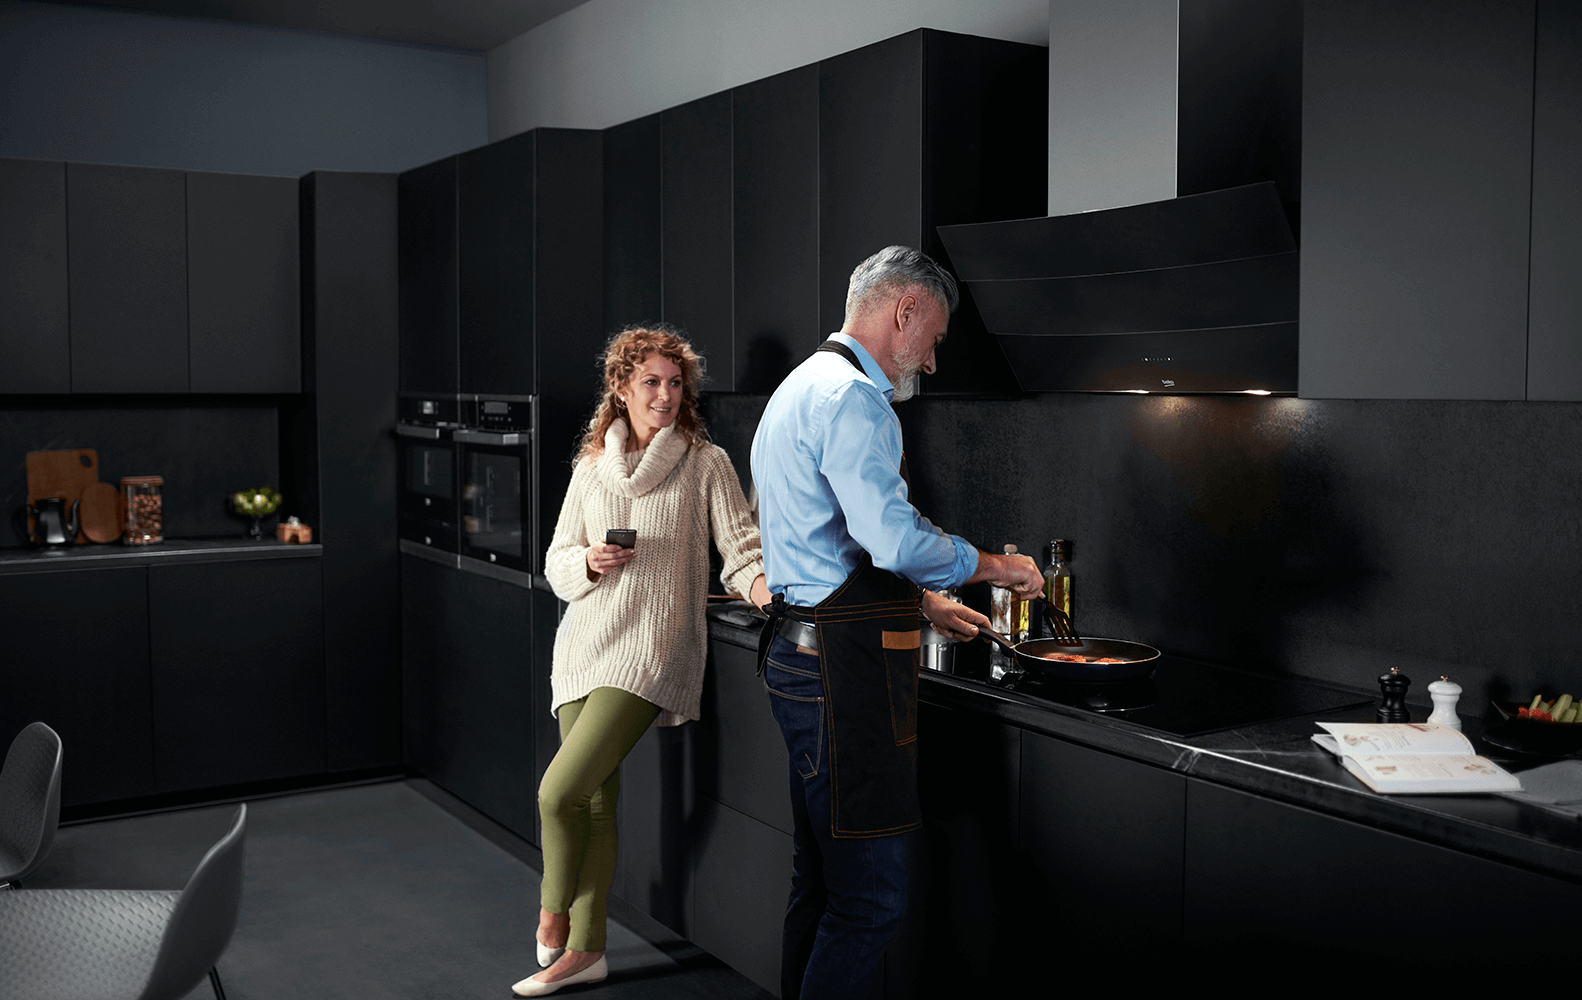 https://www.beko.com/content/dam/serbia-rs-aem/serbia-rs-aemProductCatalog/technology/tech_LowNoiseOperation_Cooking/BI-Hood-Low-Noise-Operation-Secondary.png